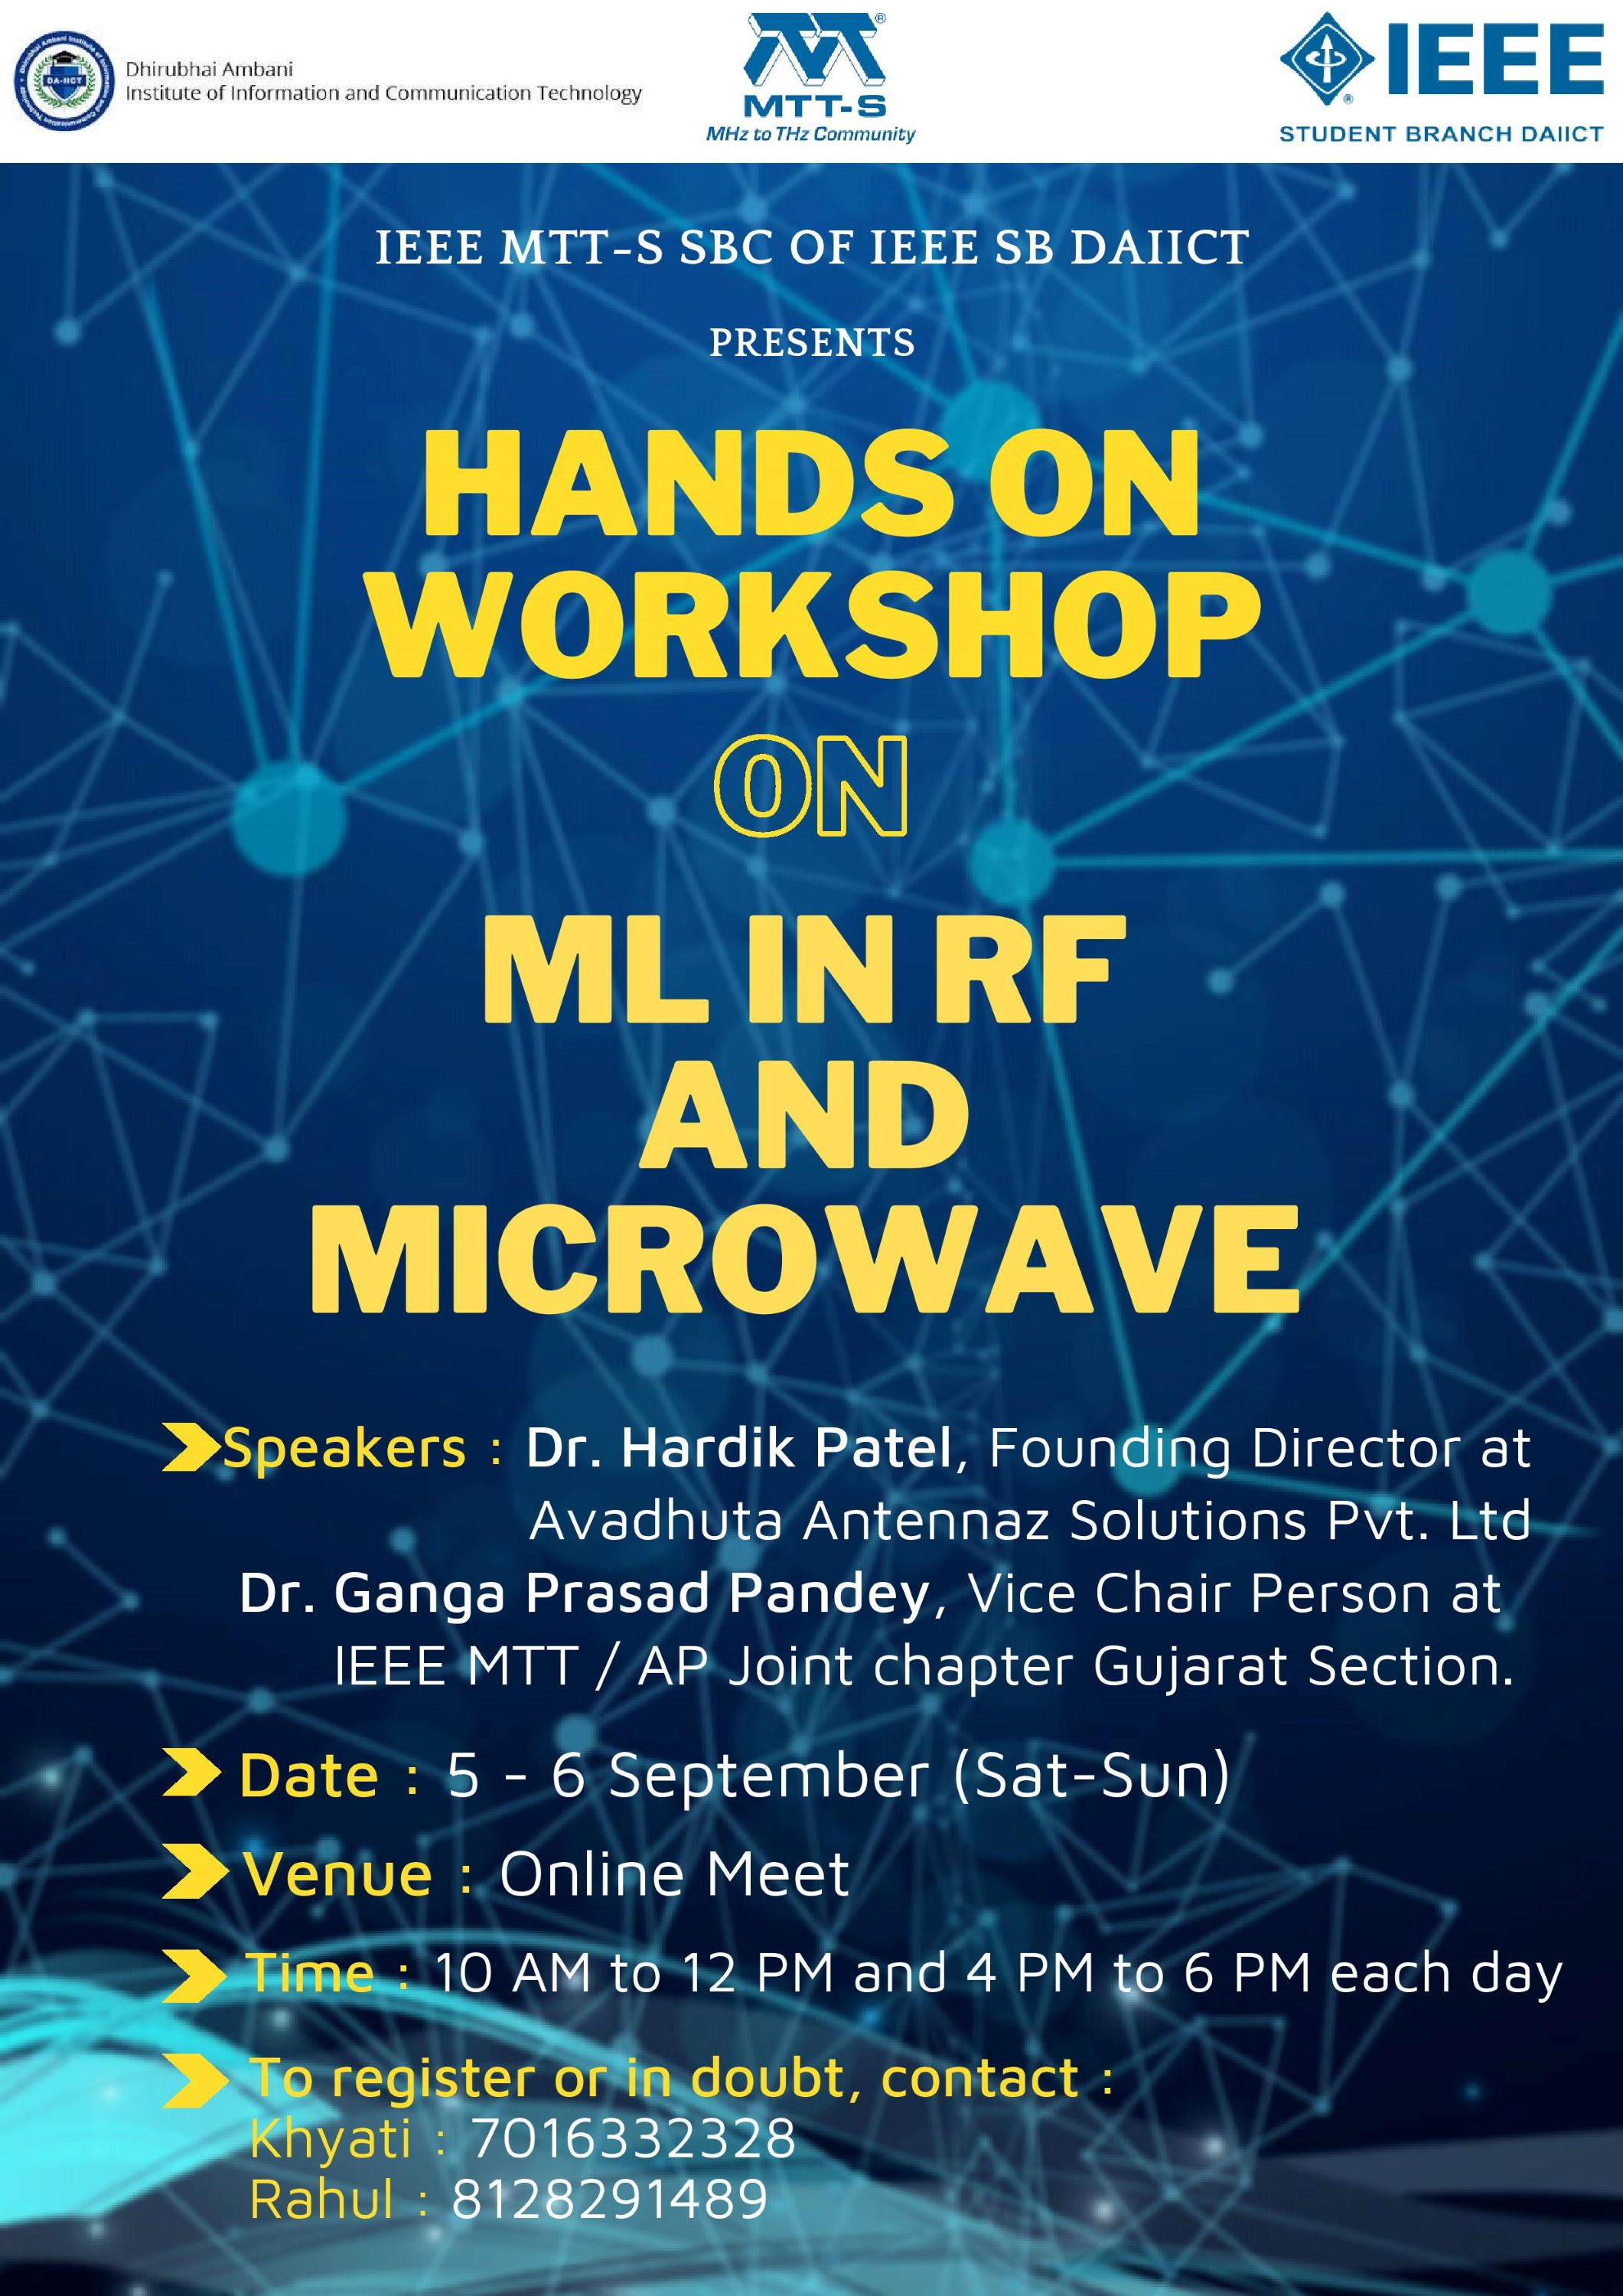 Hands-on Workshop on ML in RF and Microwave